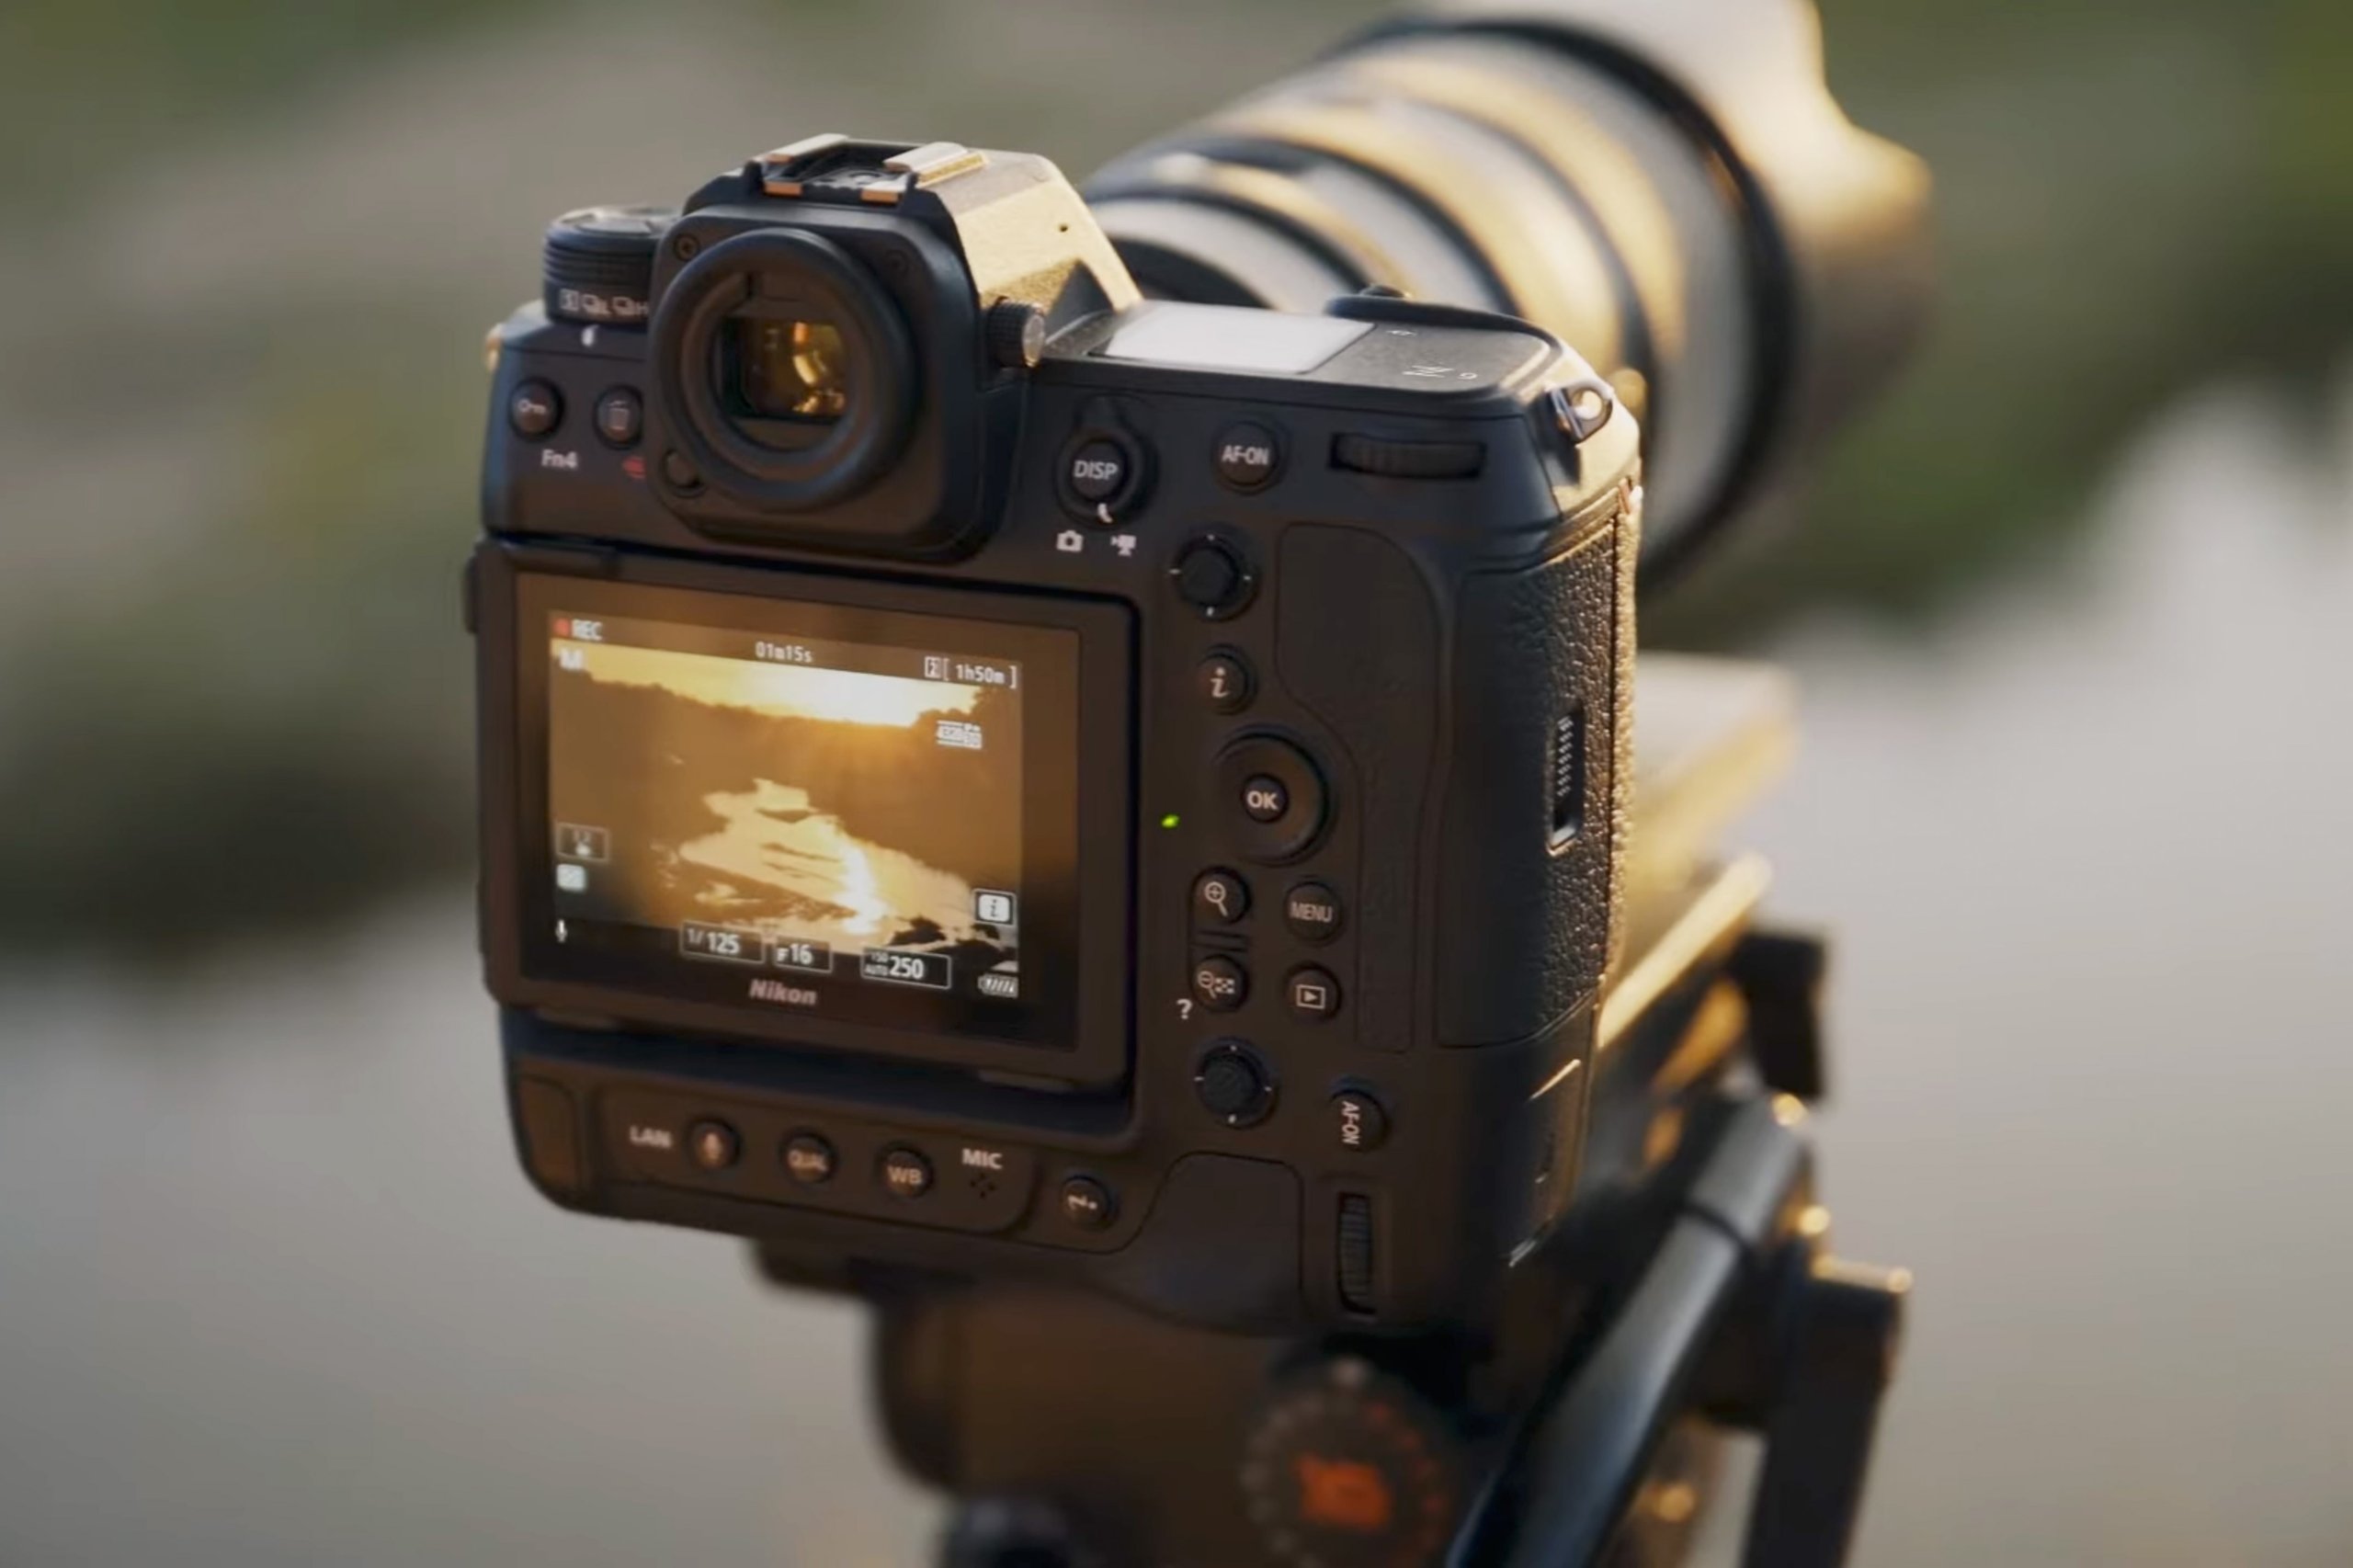 Nikon Z9 Update is So Big, It Could Have Been a Whole New Camera